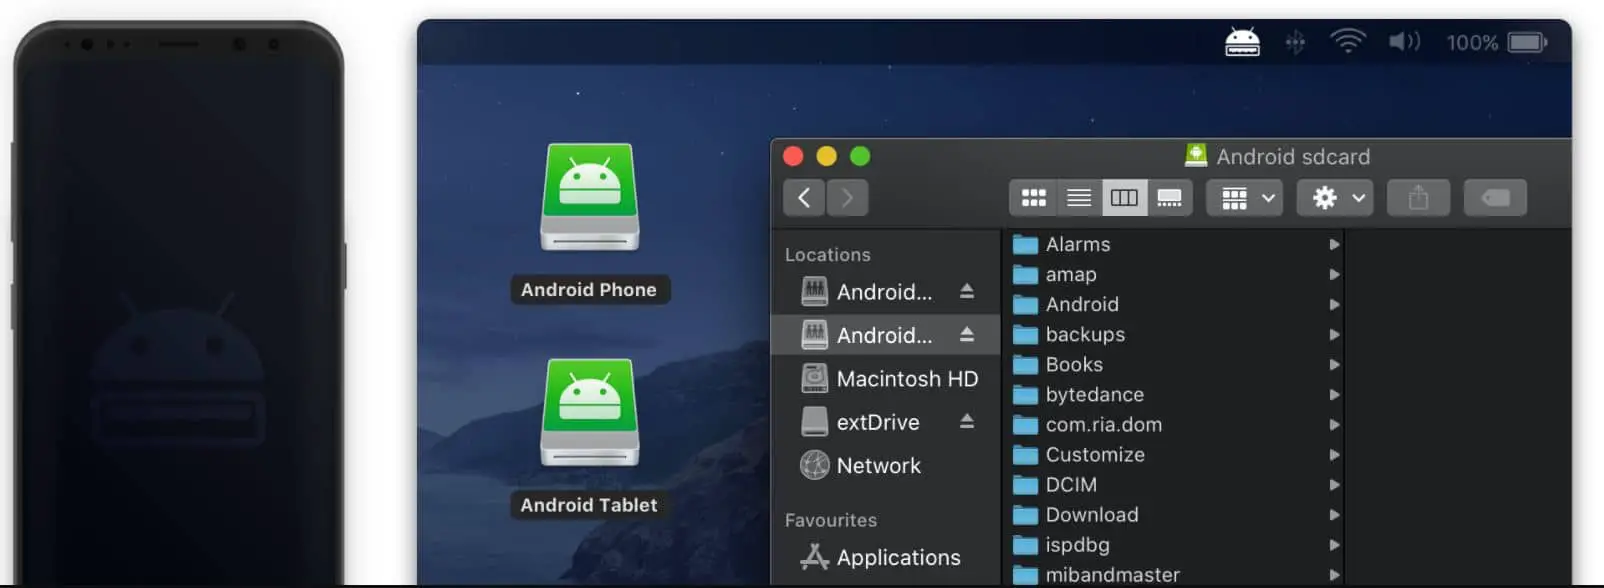 Use MacDroid to Safely Move Data Between Android & Mac OS